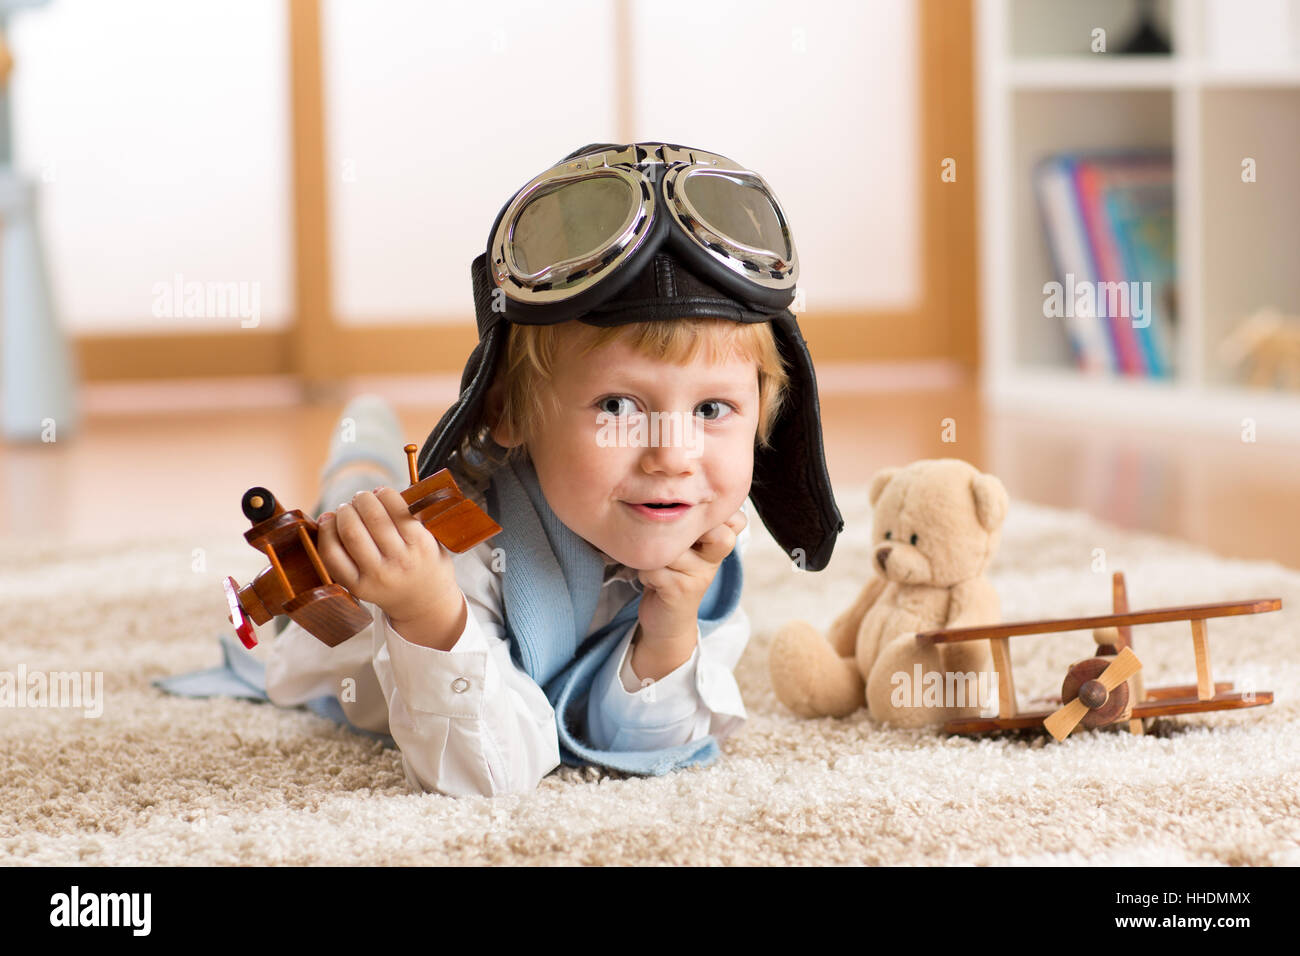 Concept of dreams and travels. Child weared pilot or aviator plays with a toy airplane at home in nursery room Stock Photo